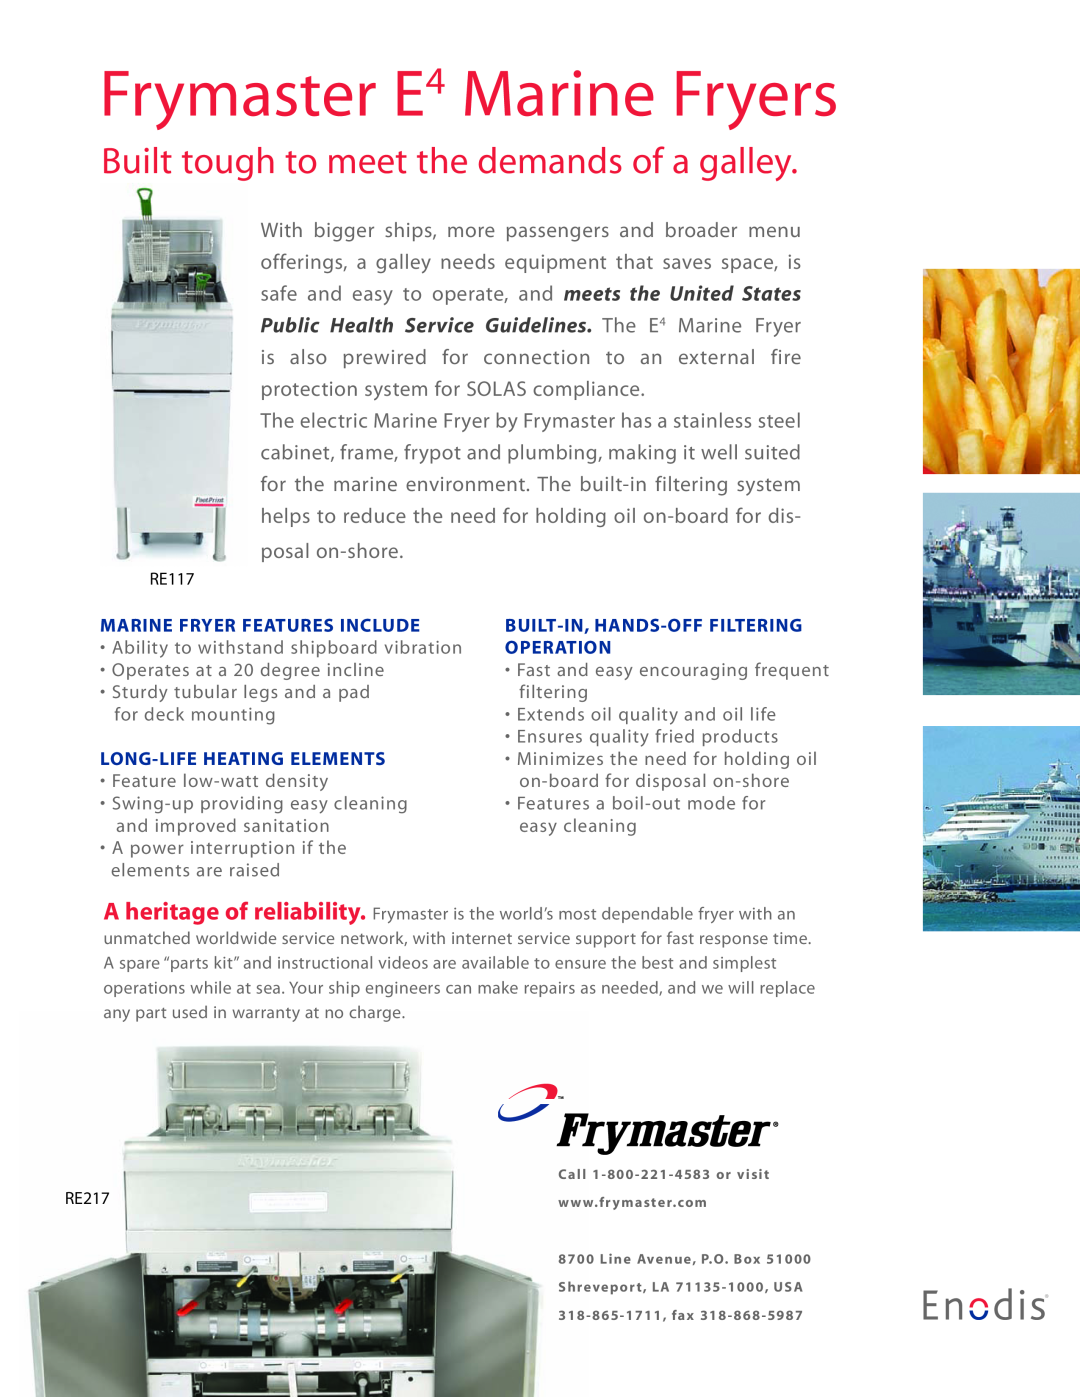 Frymaster warranty Frymaster E4 Marine Fryers, Built tough to meet the demands of a galley 